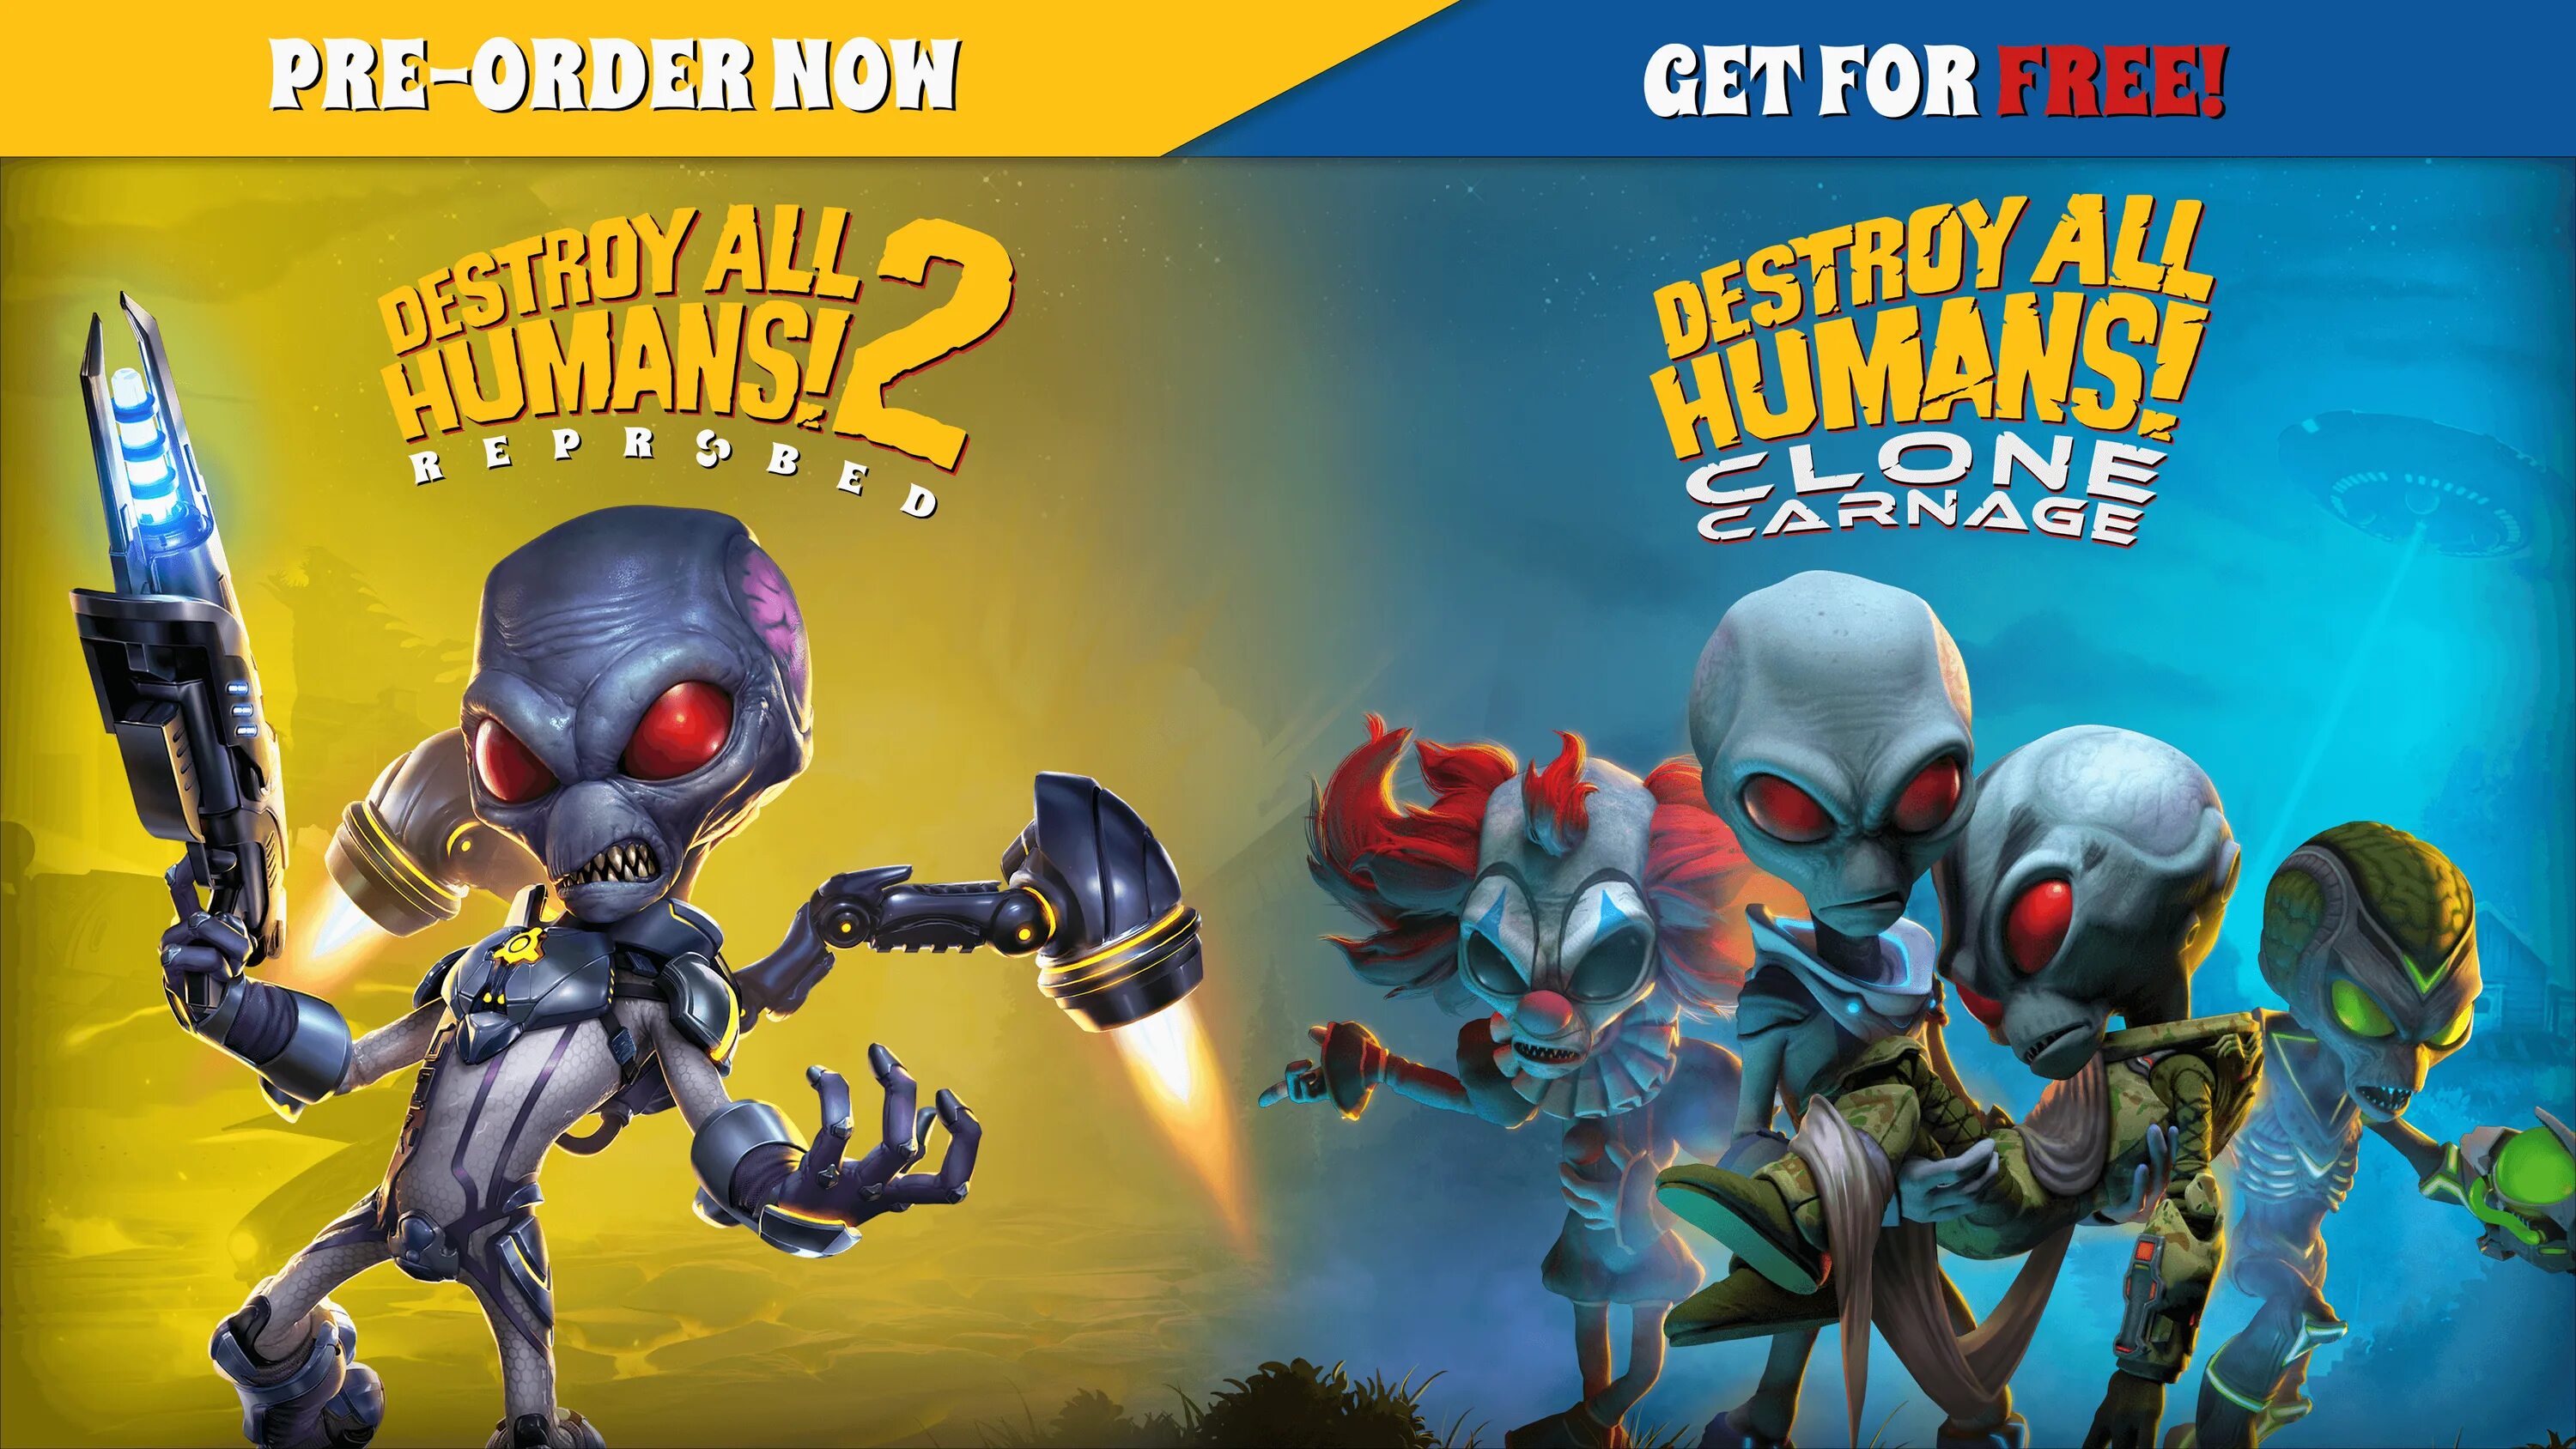 Destroy all Humans 2 reprobed. Destroy all Humans!. Крипто destroy all Humans. Игра destroy all Humans! 2 Reprobed. Destroy all humans reprobed